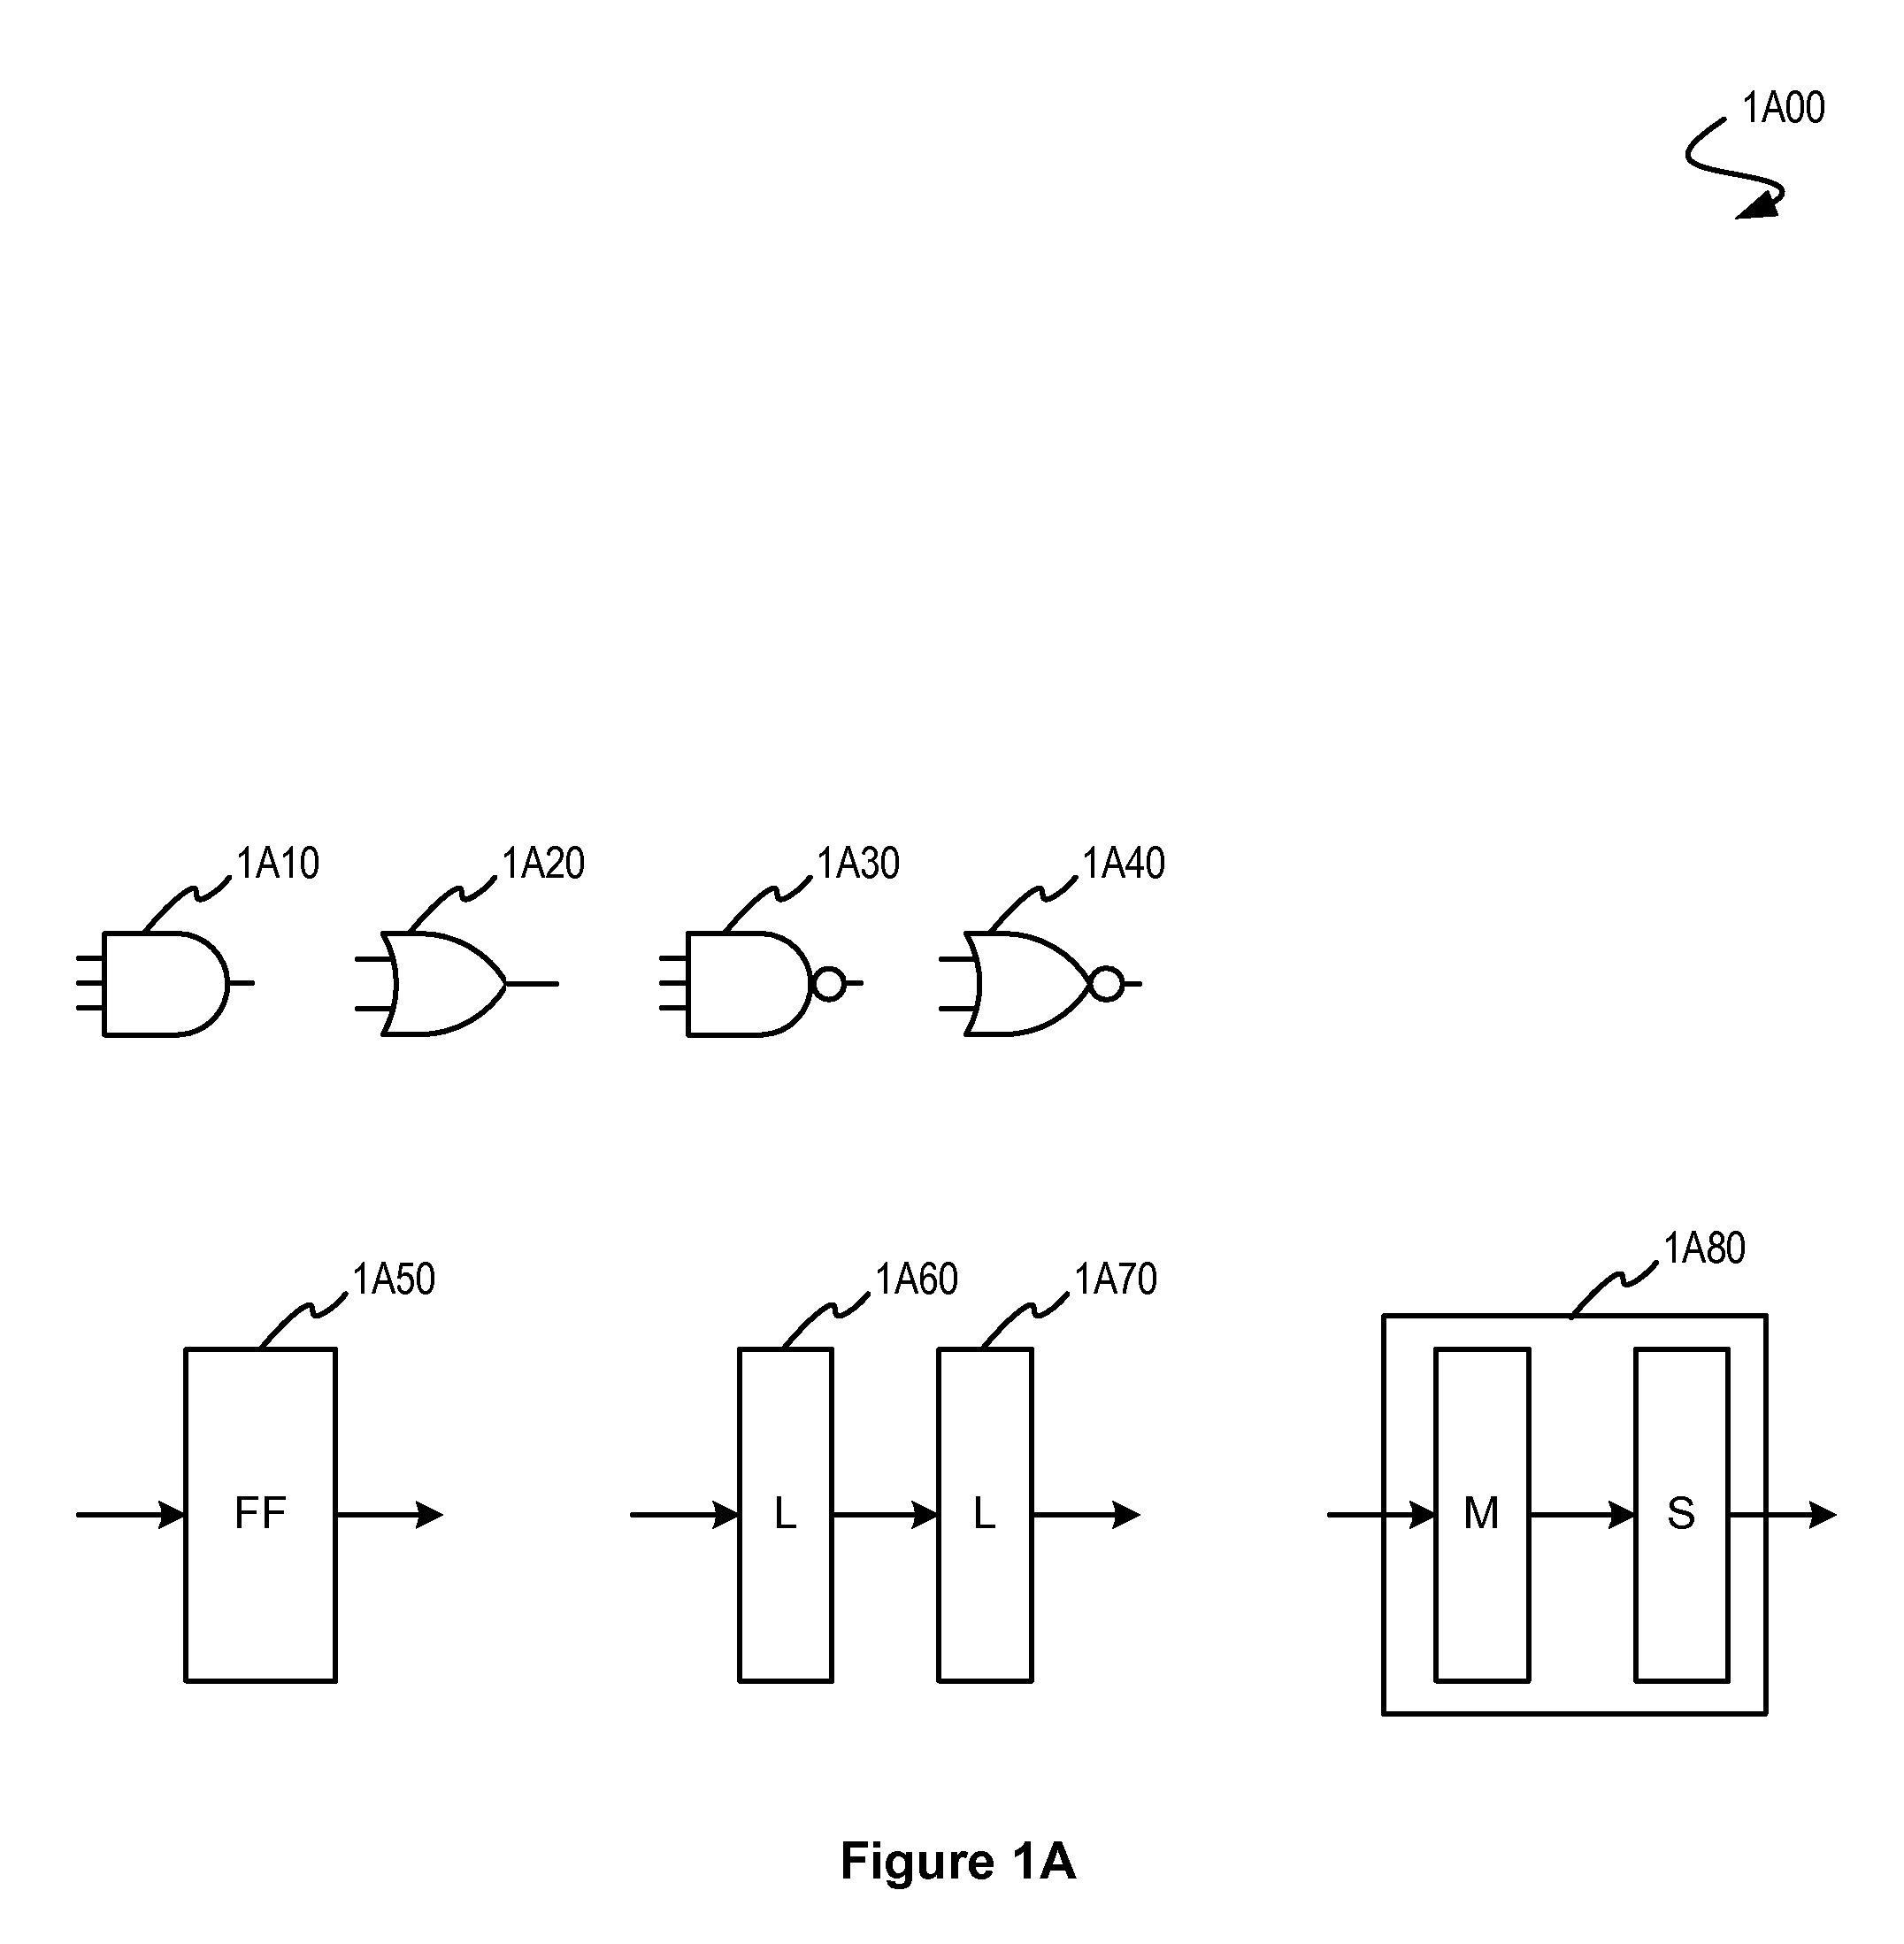 Variability-aware scheme for asynchronous circuit initialization